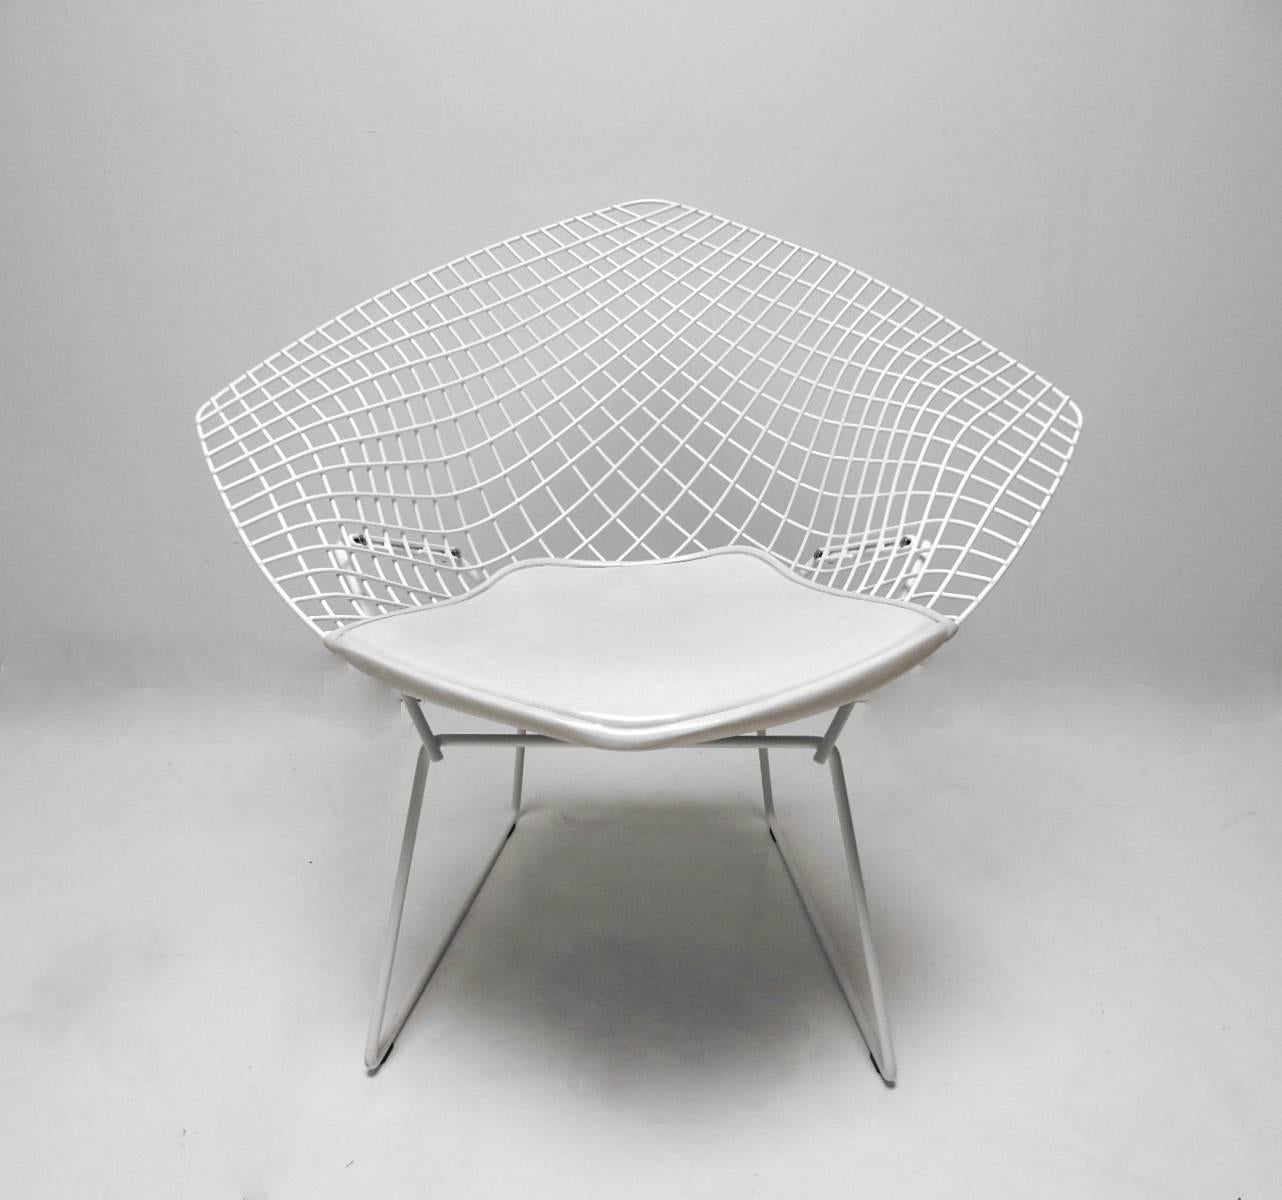 Clean pair of white diamond wire lounge chairs by Knoll.
Designed by Harry Bertoia in 1952.